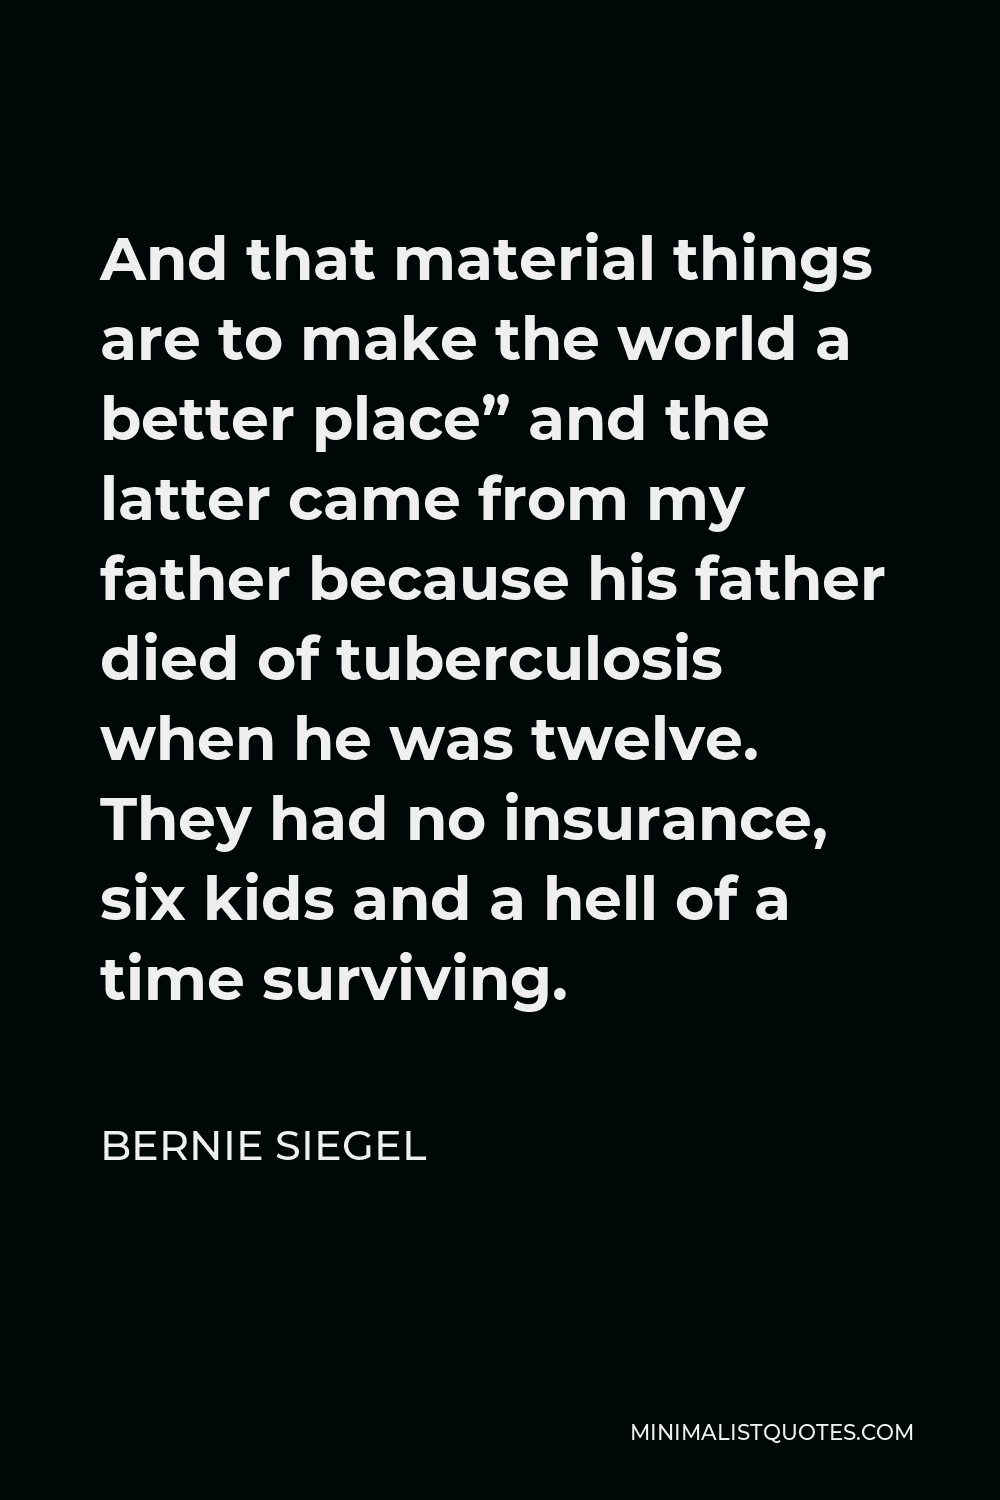 Bernie Siegel Quote - And that material things are to make the world a better place” and the latter came from my father because his father died of tuberculosis when he was twelve. They had no insurance, six kids and a hell of a time surviving.